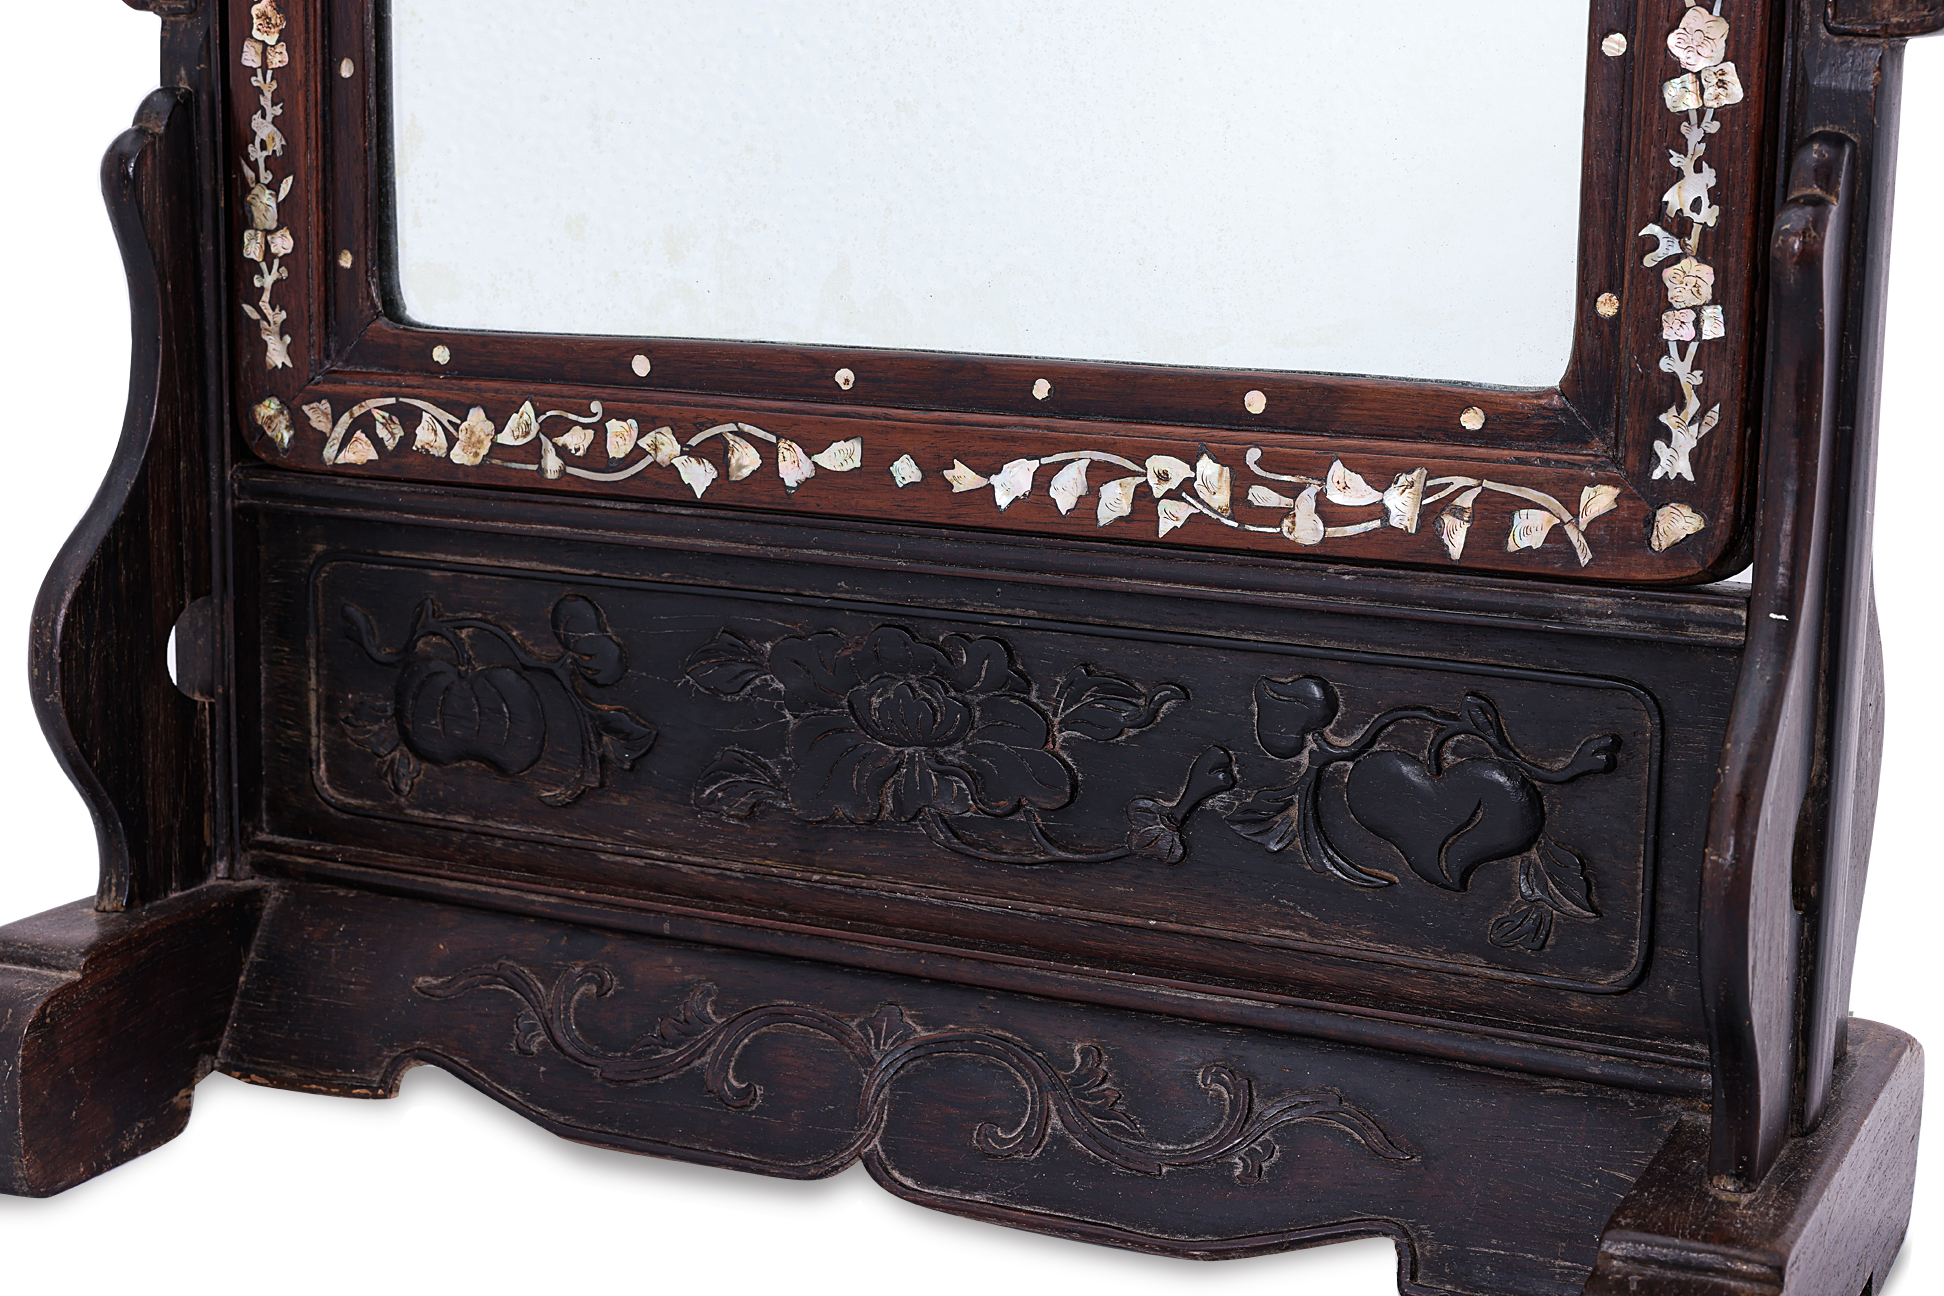 A BLACKWOOD AND MOTHER OF PEARL INLAID MIRROR ON STAND - Image 2 of 3